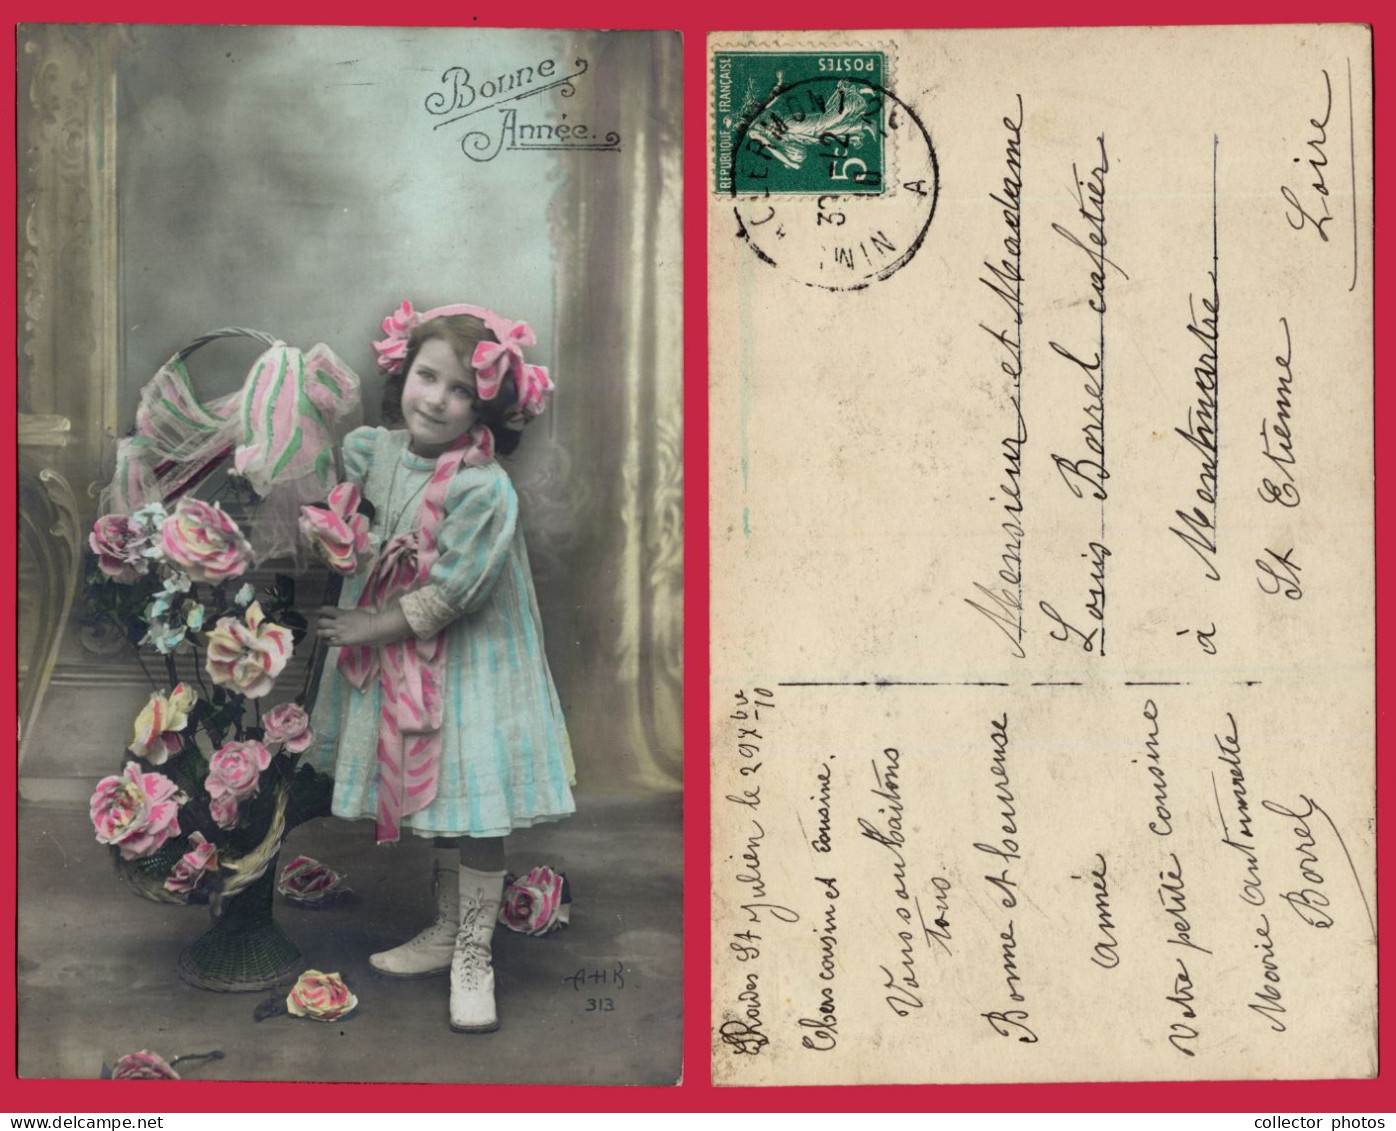 France early 20th century. Lot of 11 vintage postcards, belle epoque style. All posted with stamps [de122]